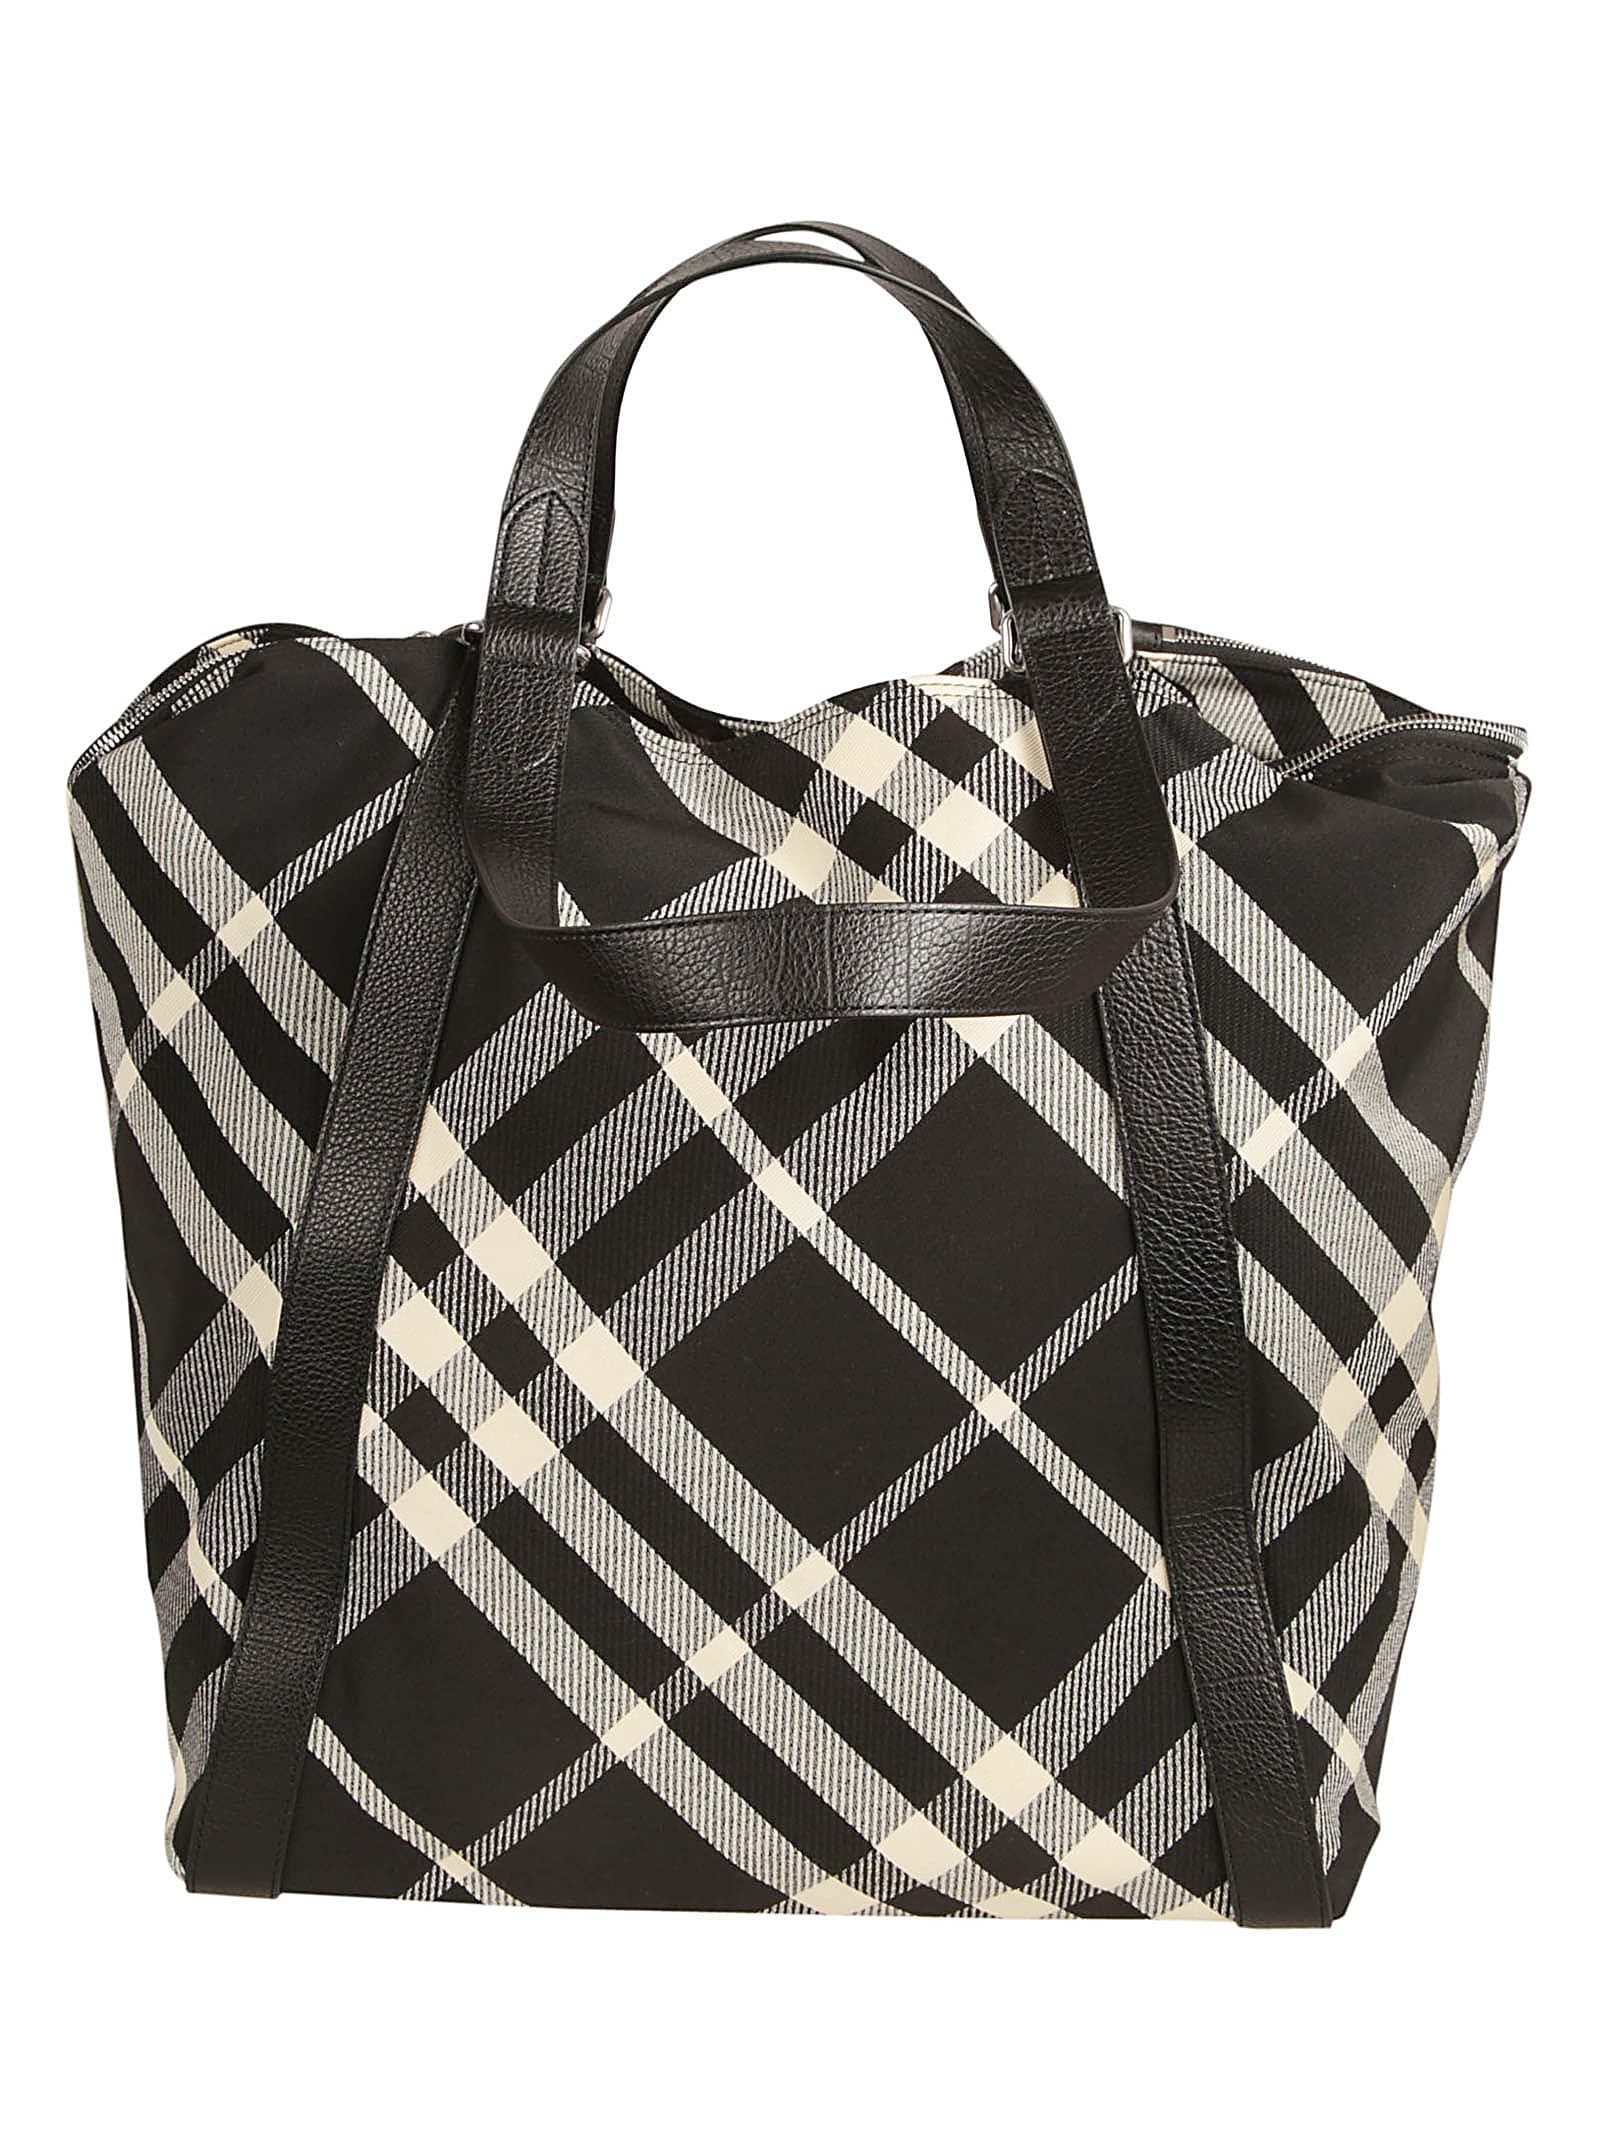 Burberry Check Patterned Tote In Black/calico